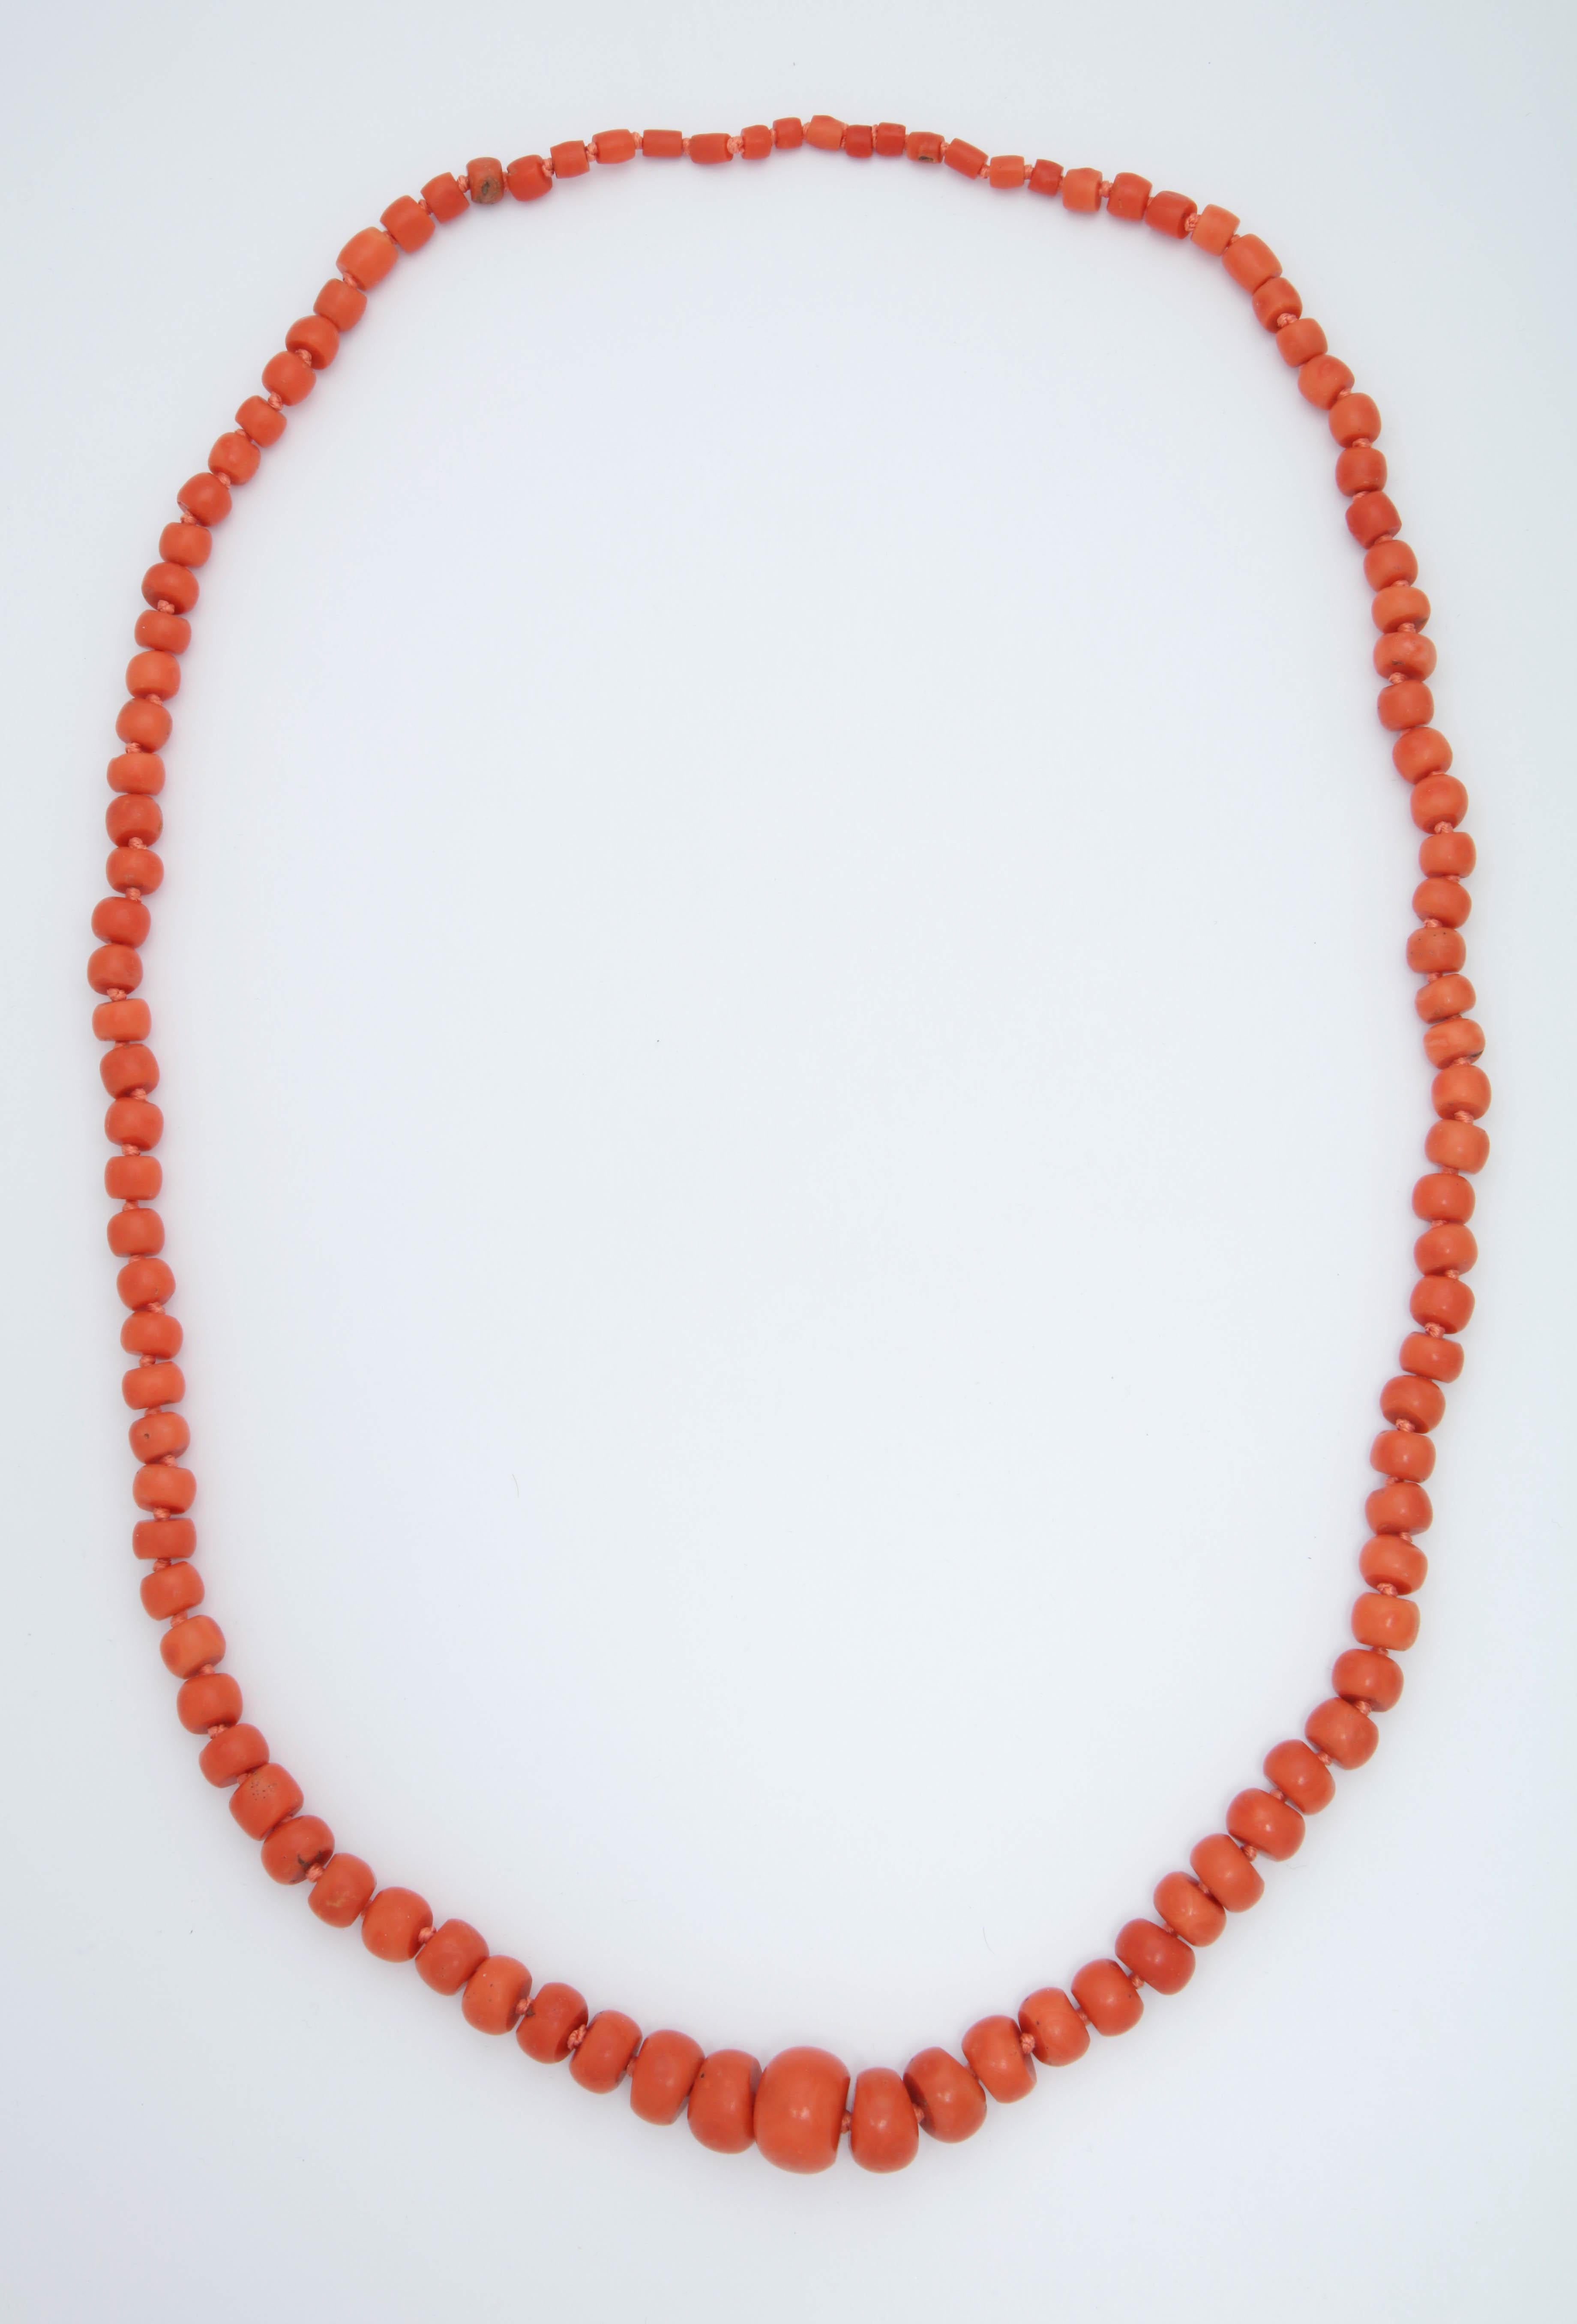 One Ladies Large Coral Necklace Consisting Of 600 Carats Of Natural Color Very Smooth Coral Beads. Total Length 34 Inches.NOTE: Necklace Has Been Restrung With A Double Knotting For Extra Security.